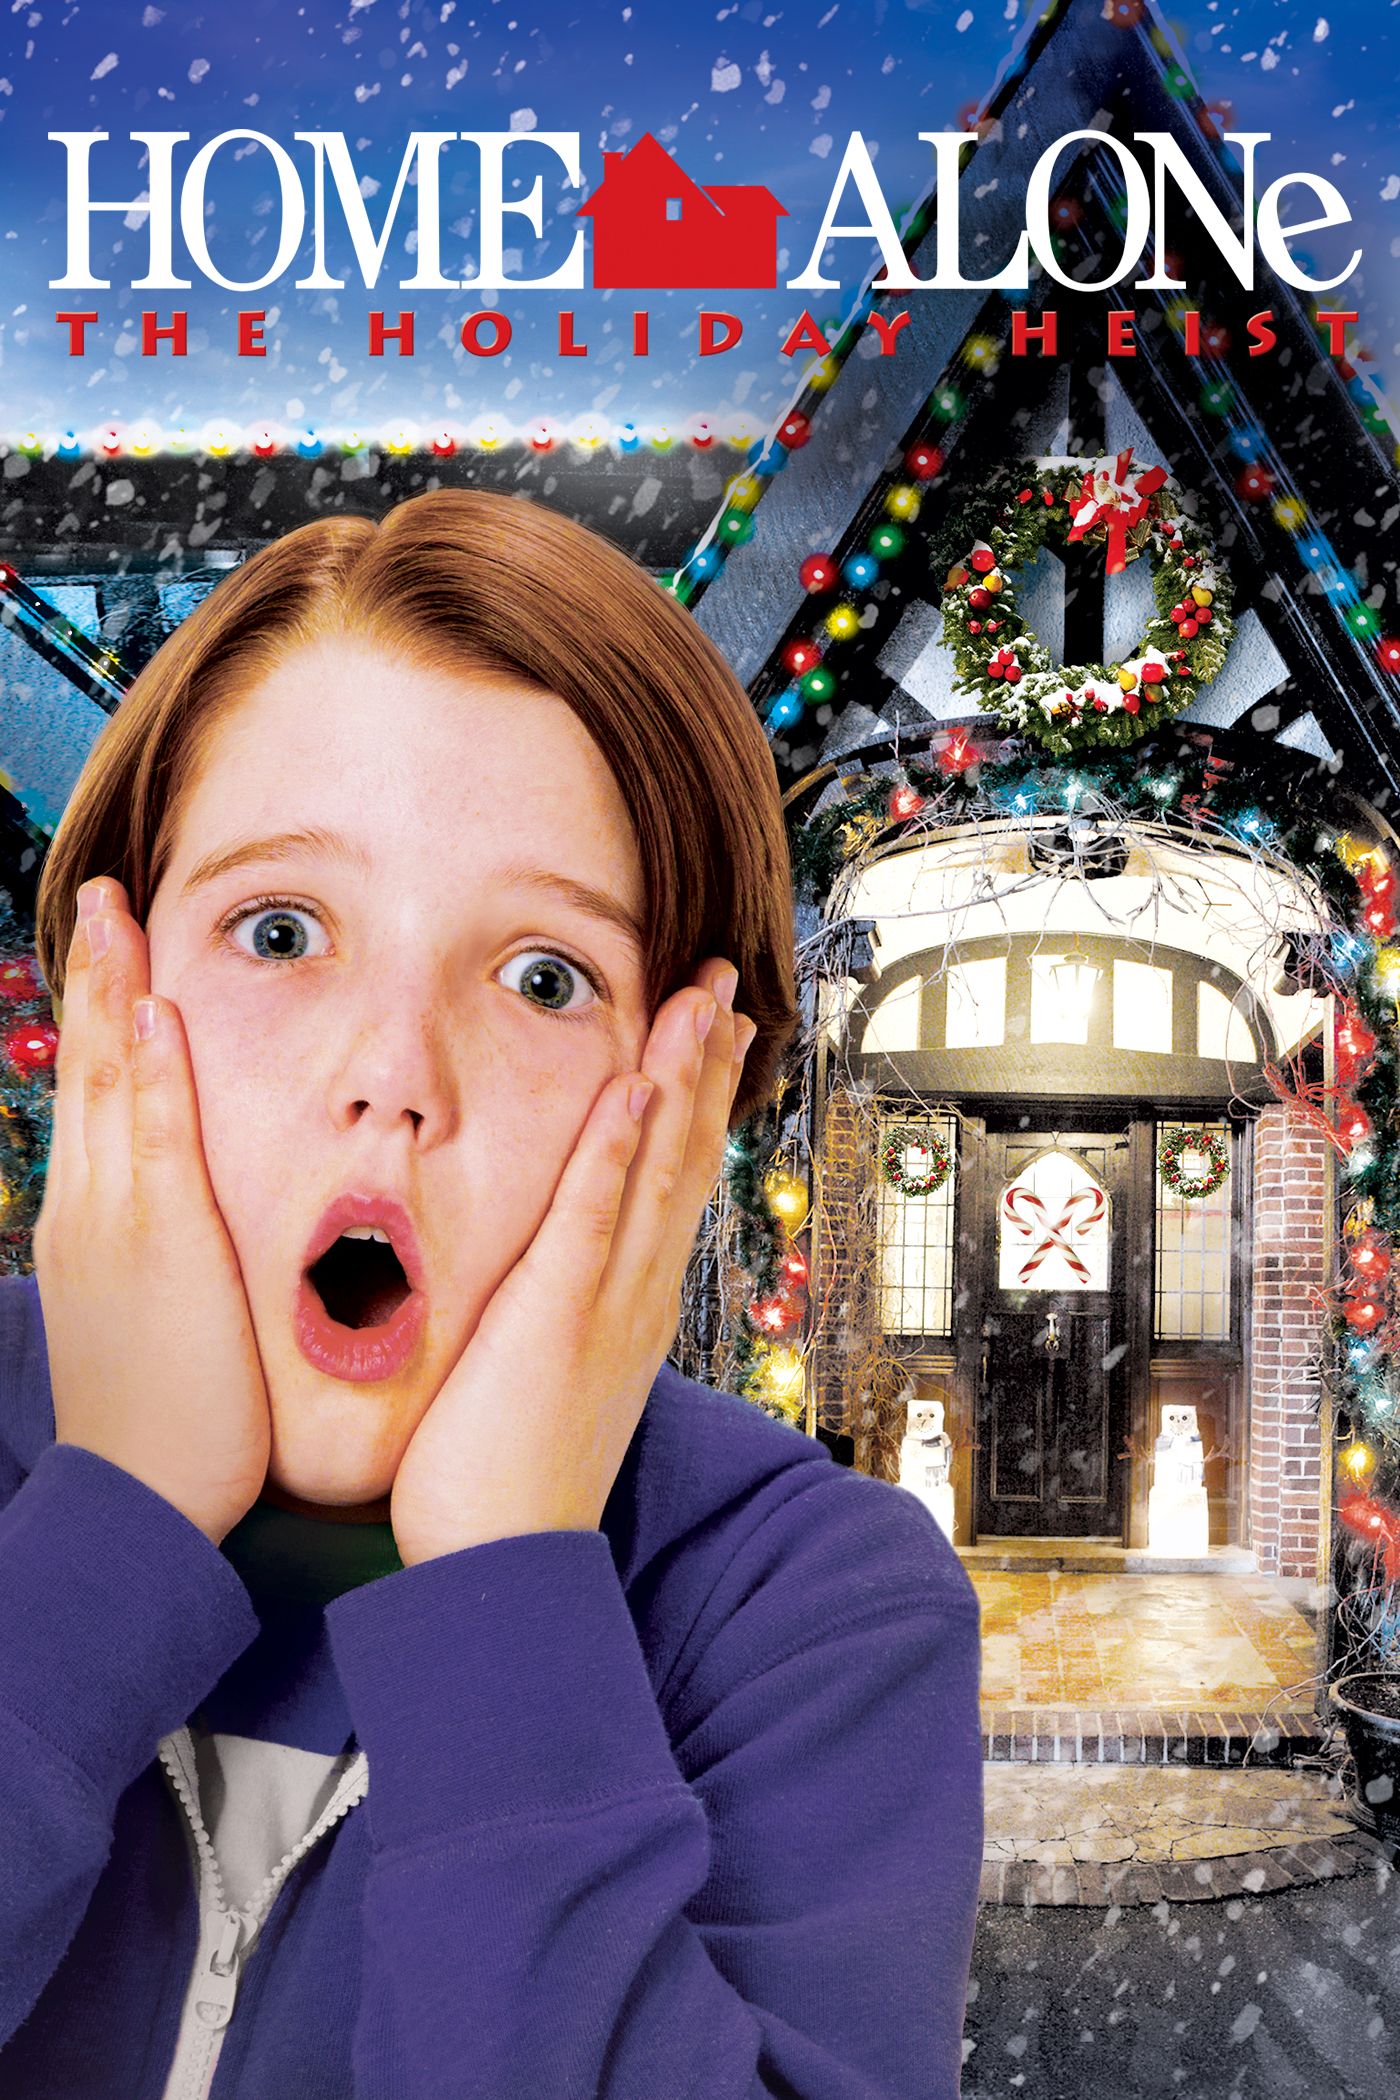 home alone full movie download